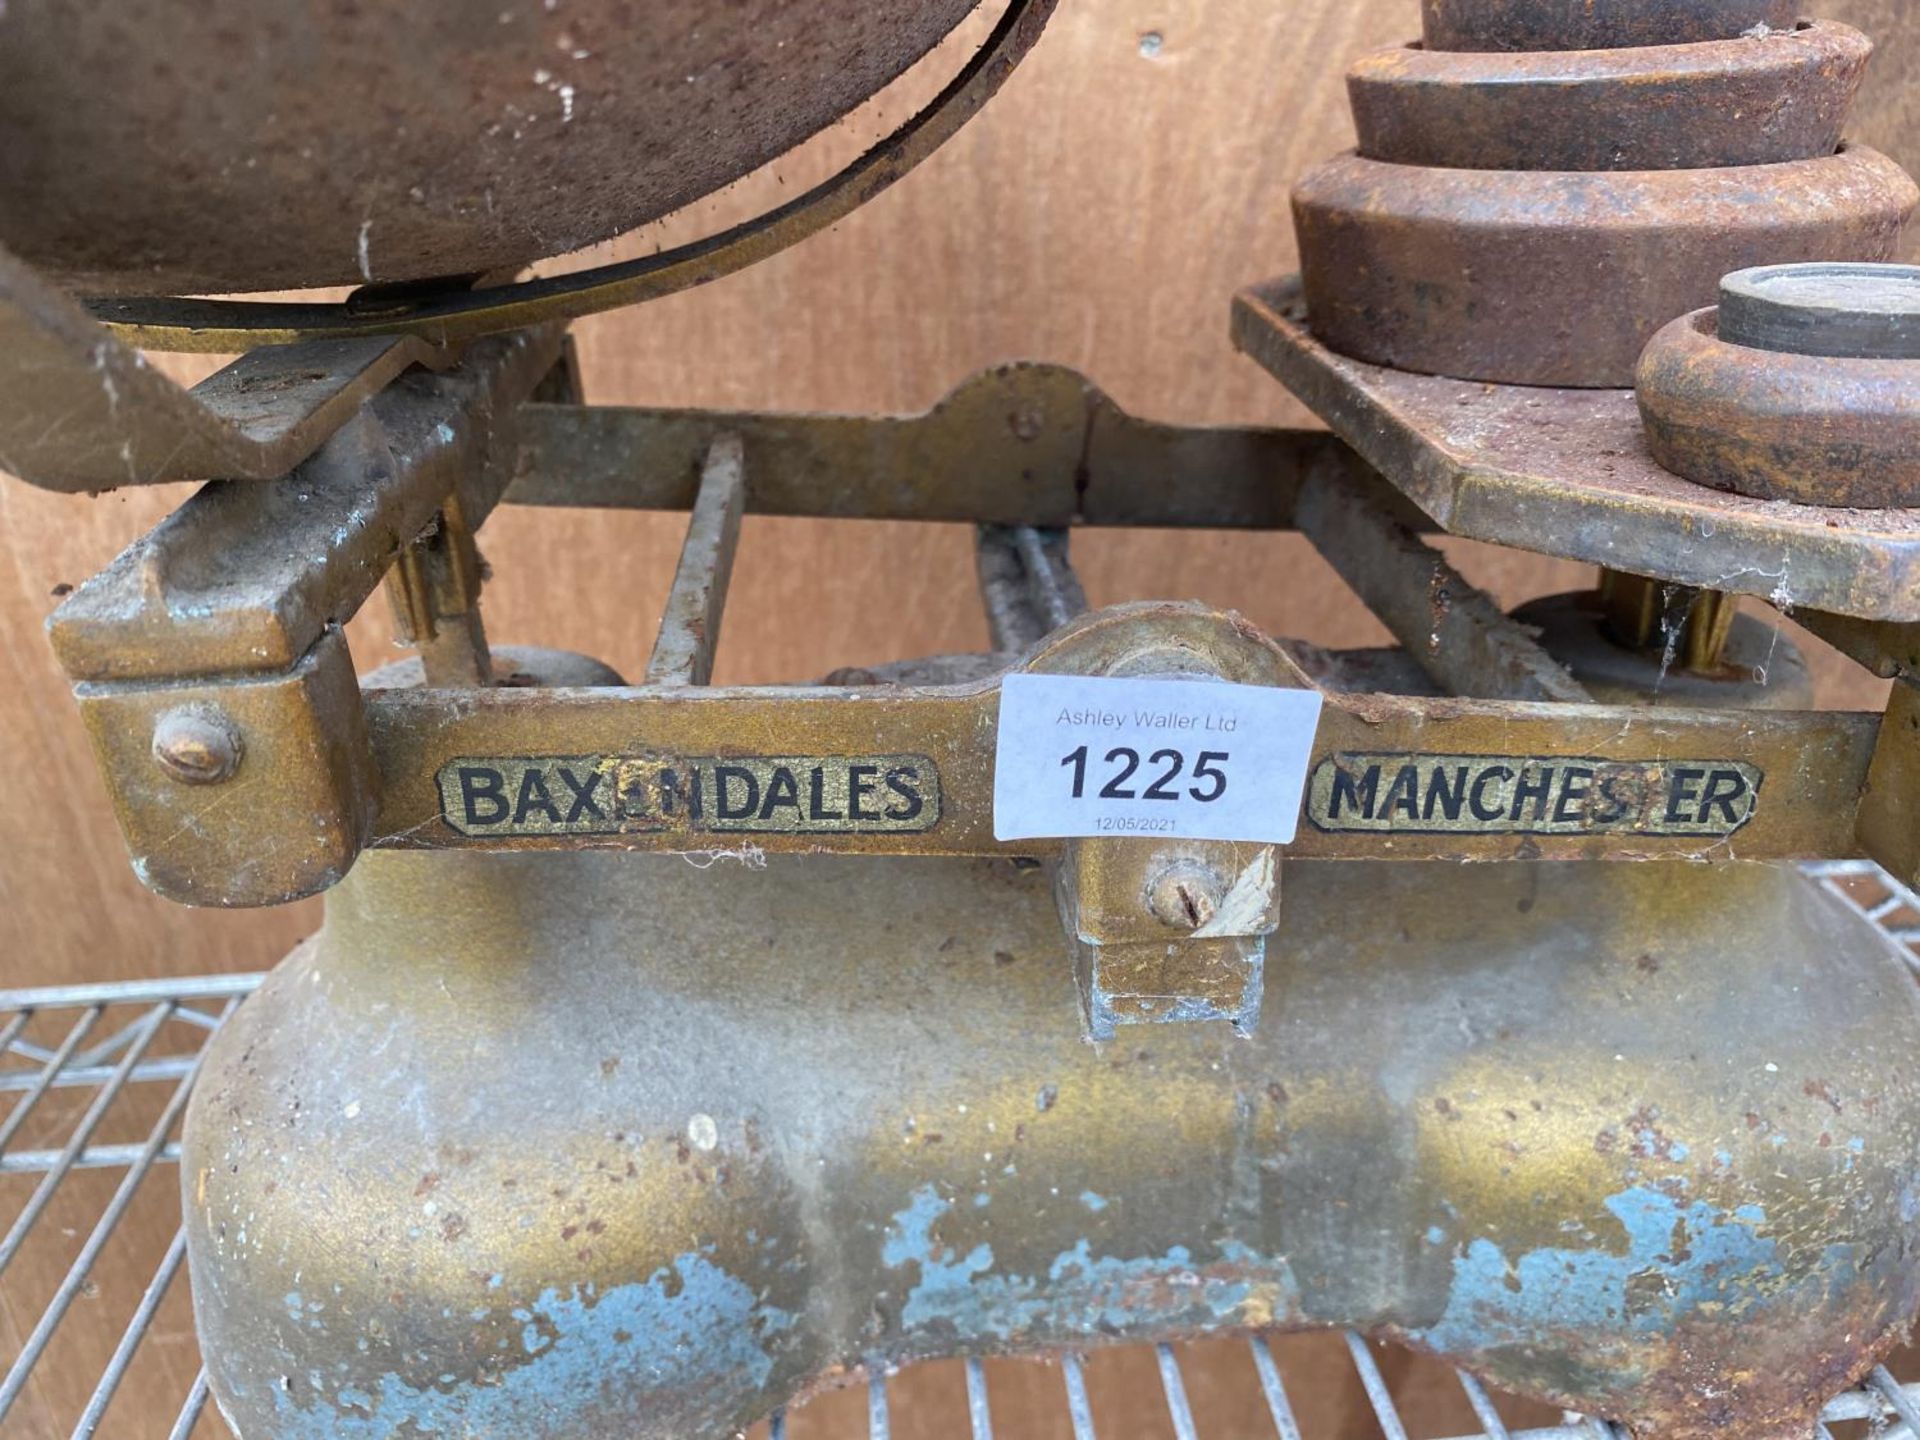 A SET OF LARGE VINTAGE 'BAXENDALES OF MANCHESTER' SCALES WITH WEIGHTS - Image 2 of 3